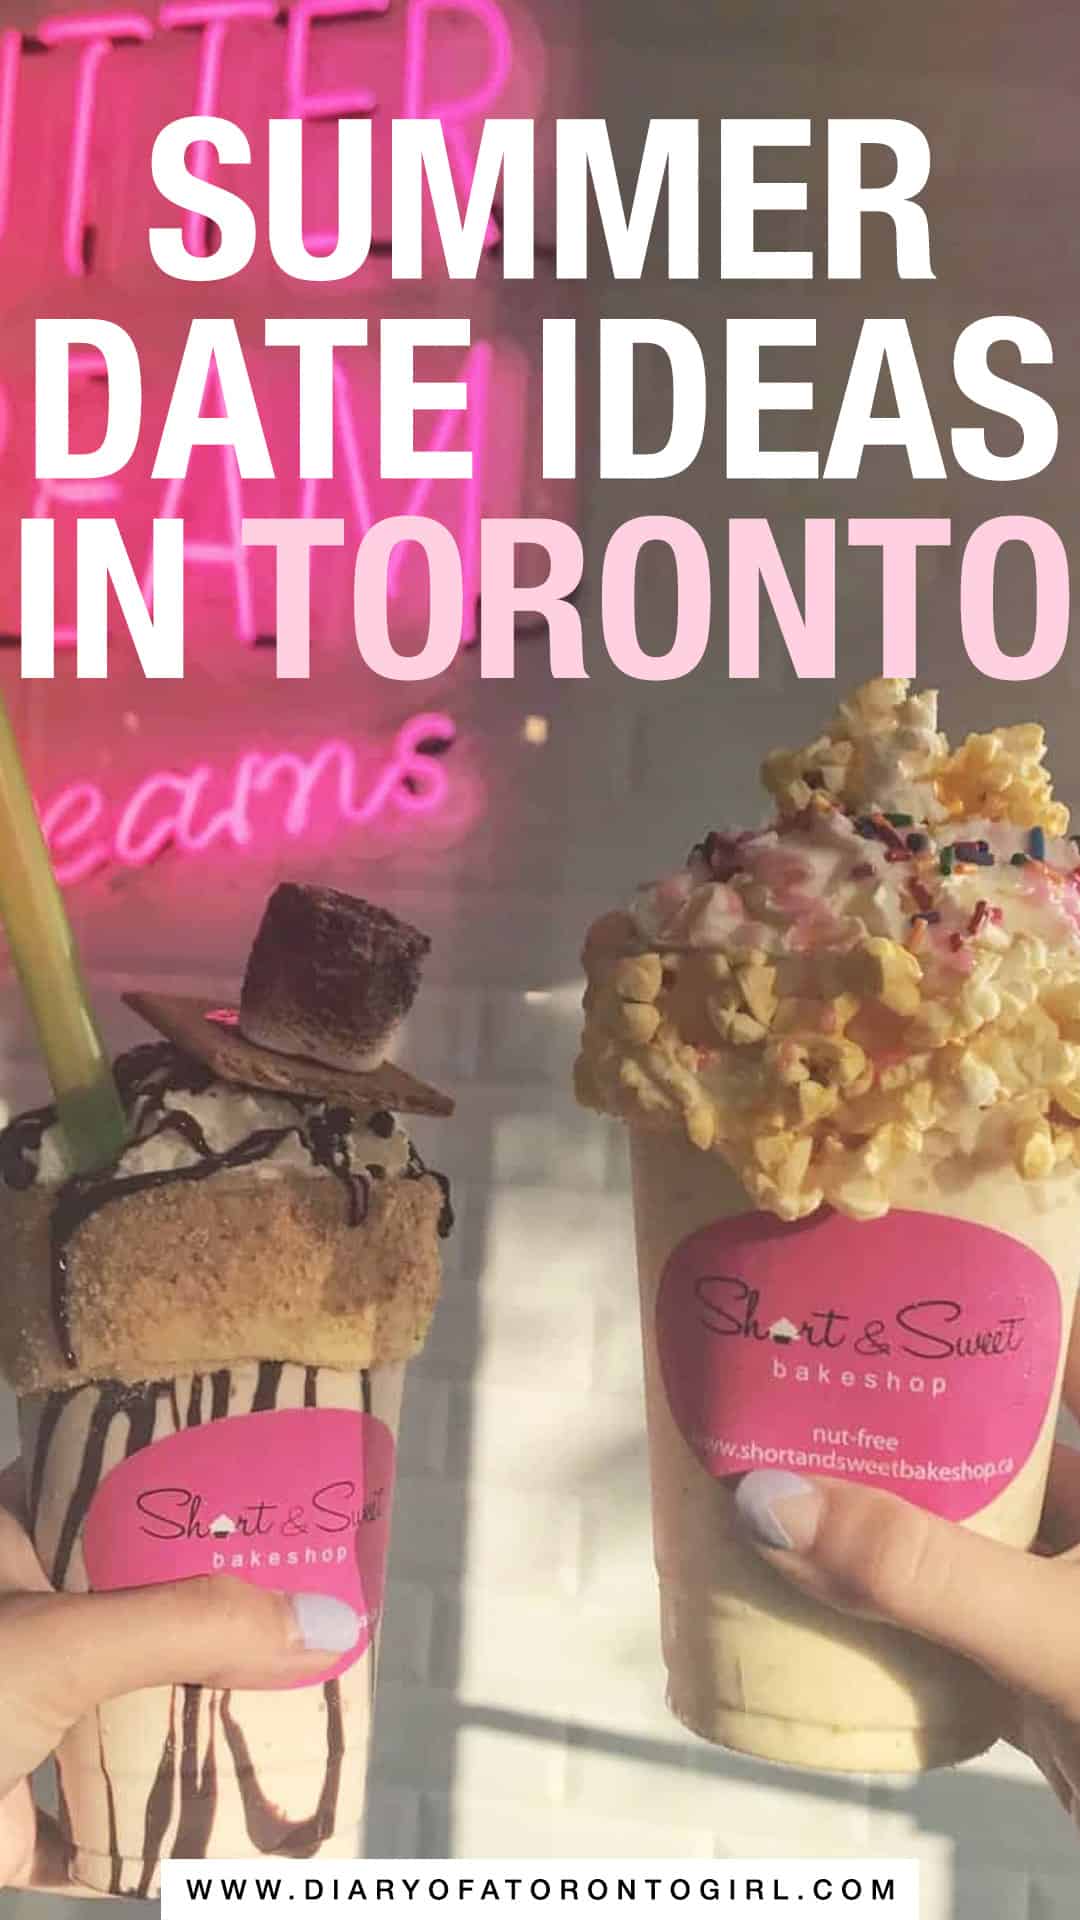 Looking for cute date ideas in Toronto this summer? Here are fun and unique dates you can go on with your significant other or even your BFF!